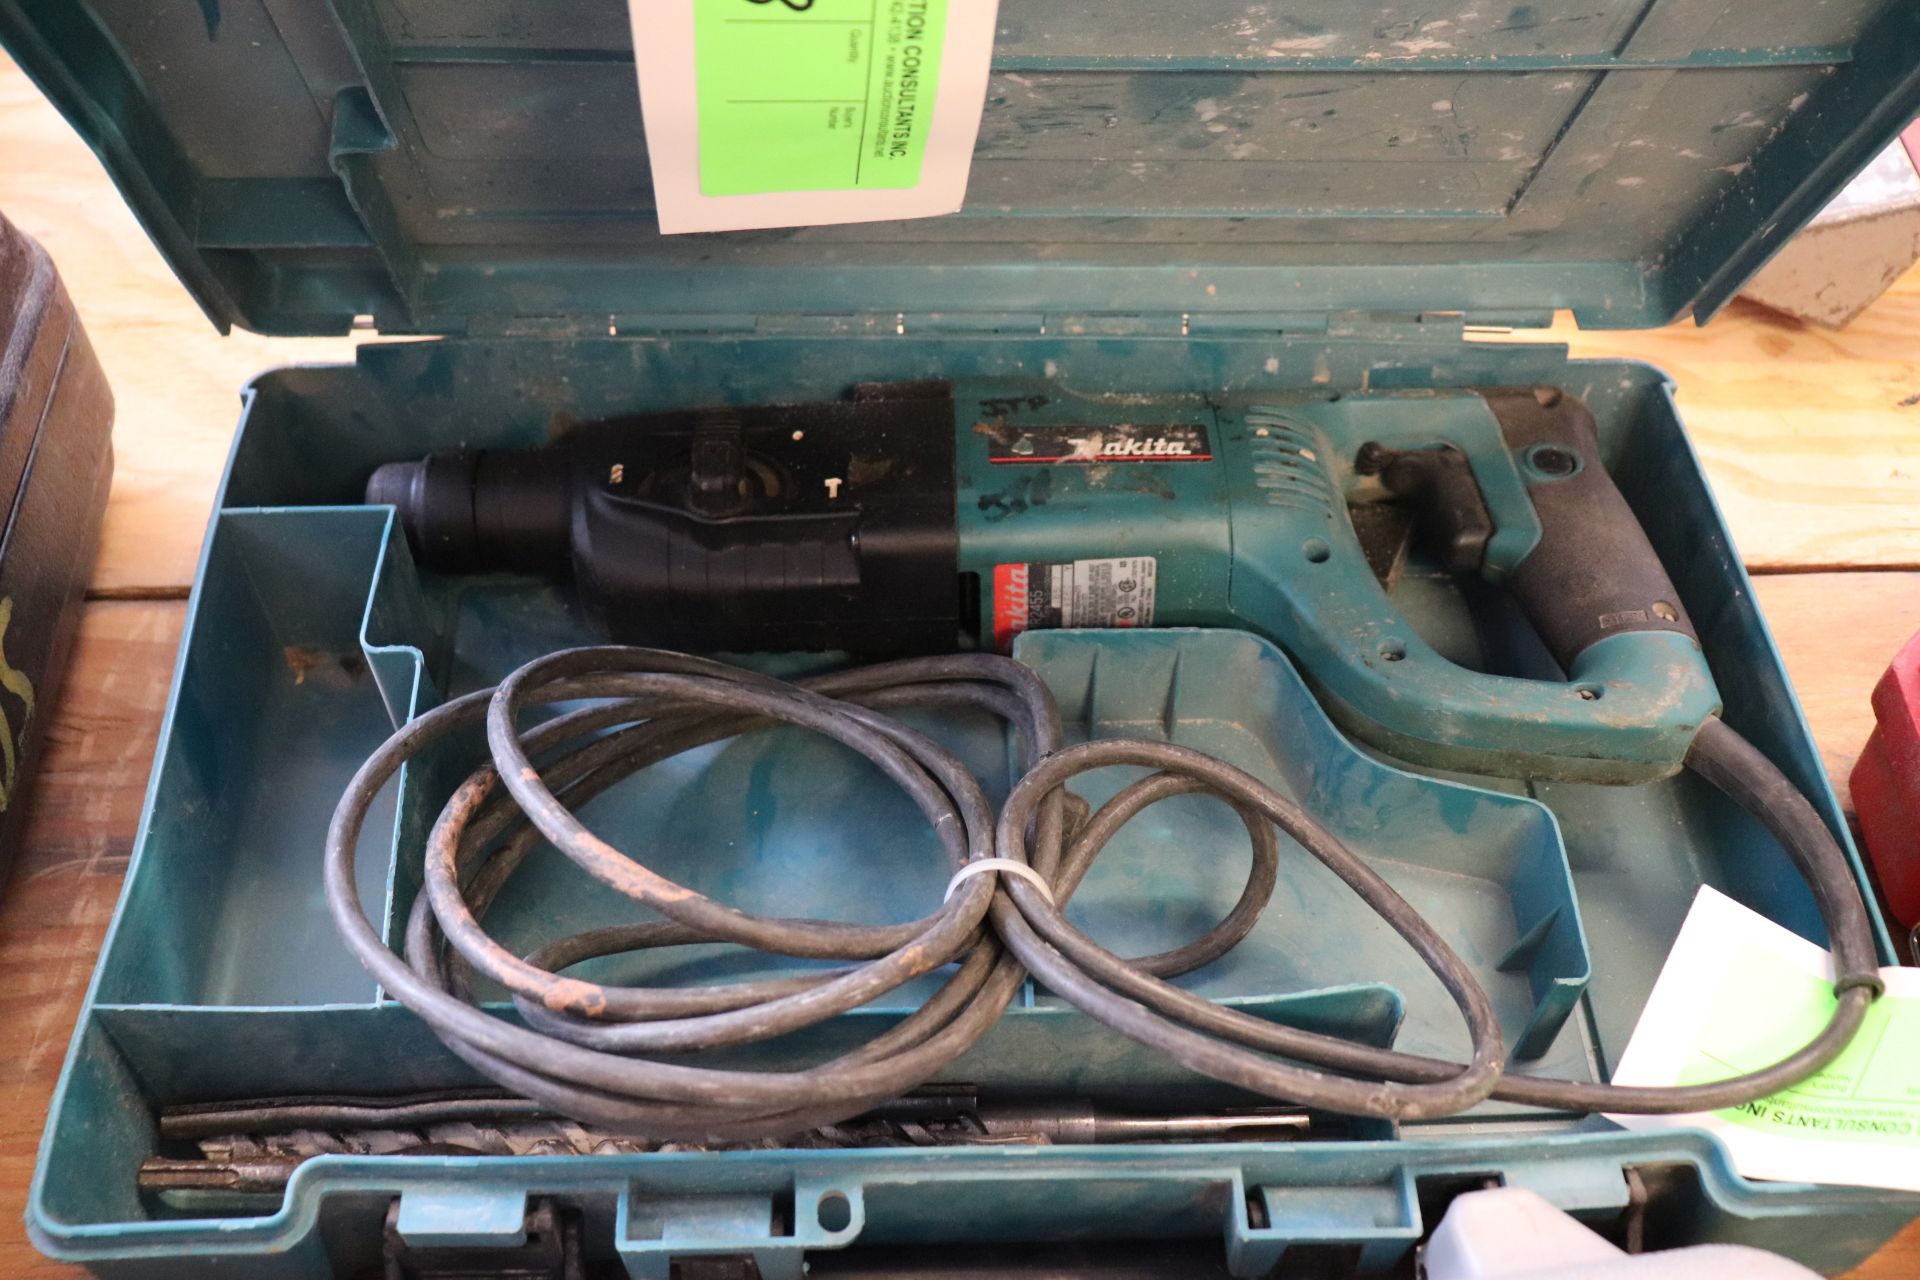 Makita model HR2455 hammer drill with bits and case, electric